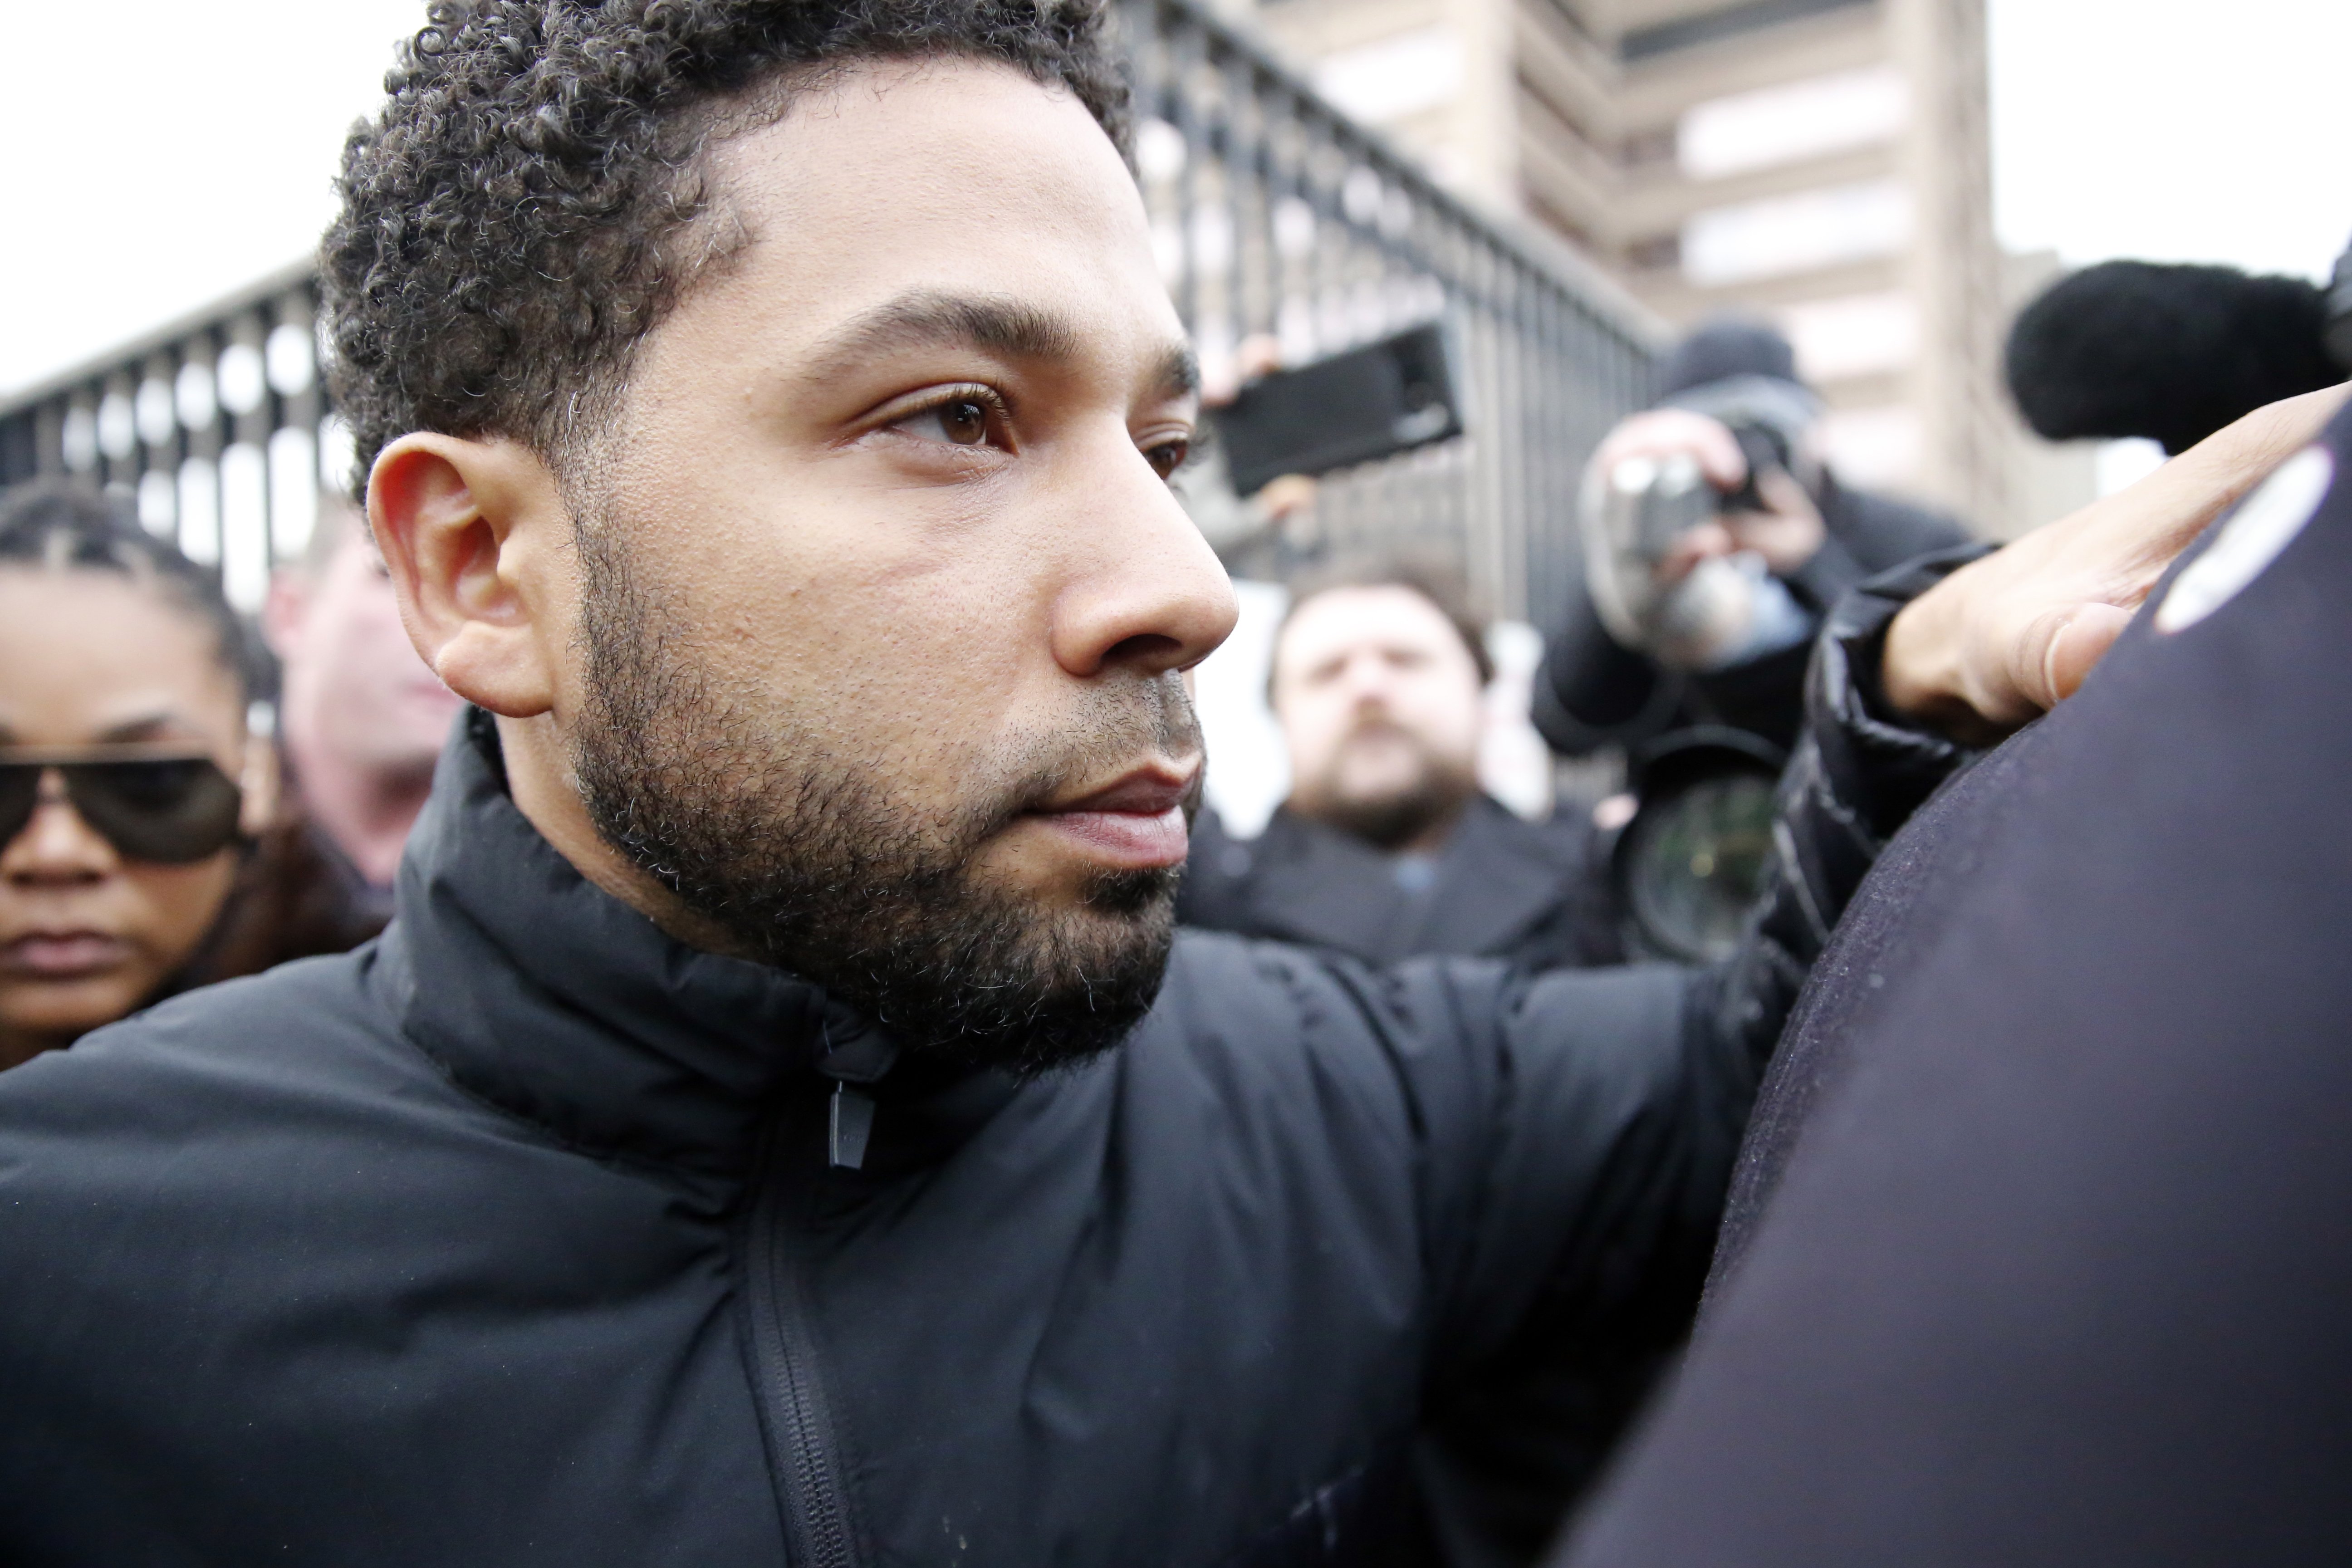 "Empire" star Jussie Smollett leaving Cook County jail after posting bail in February 2019. | Photo: Getty Images